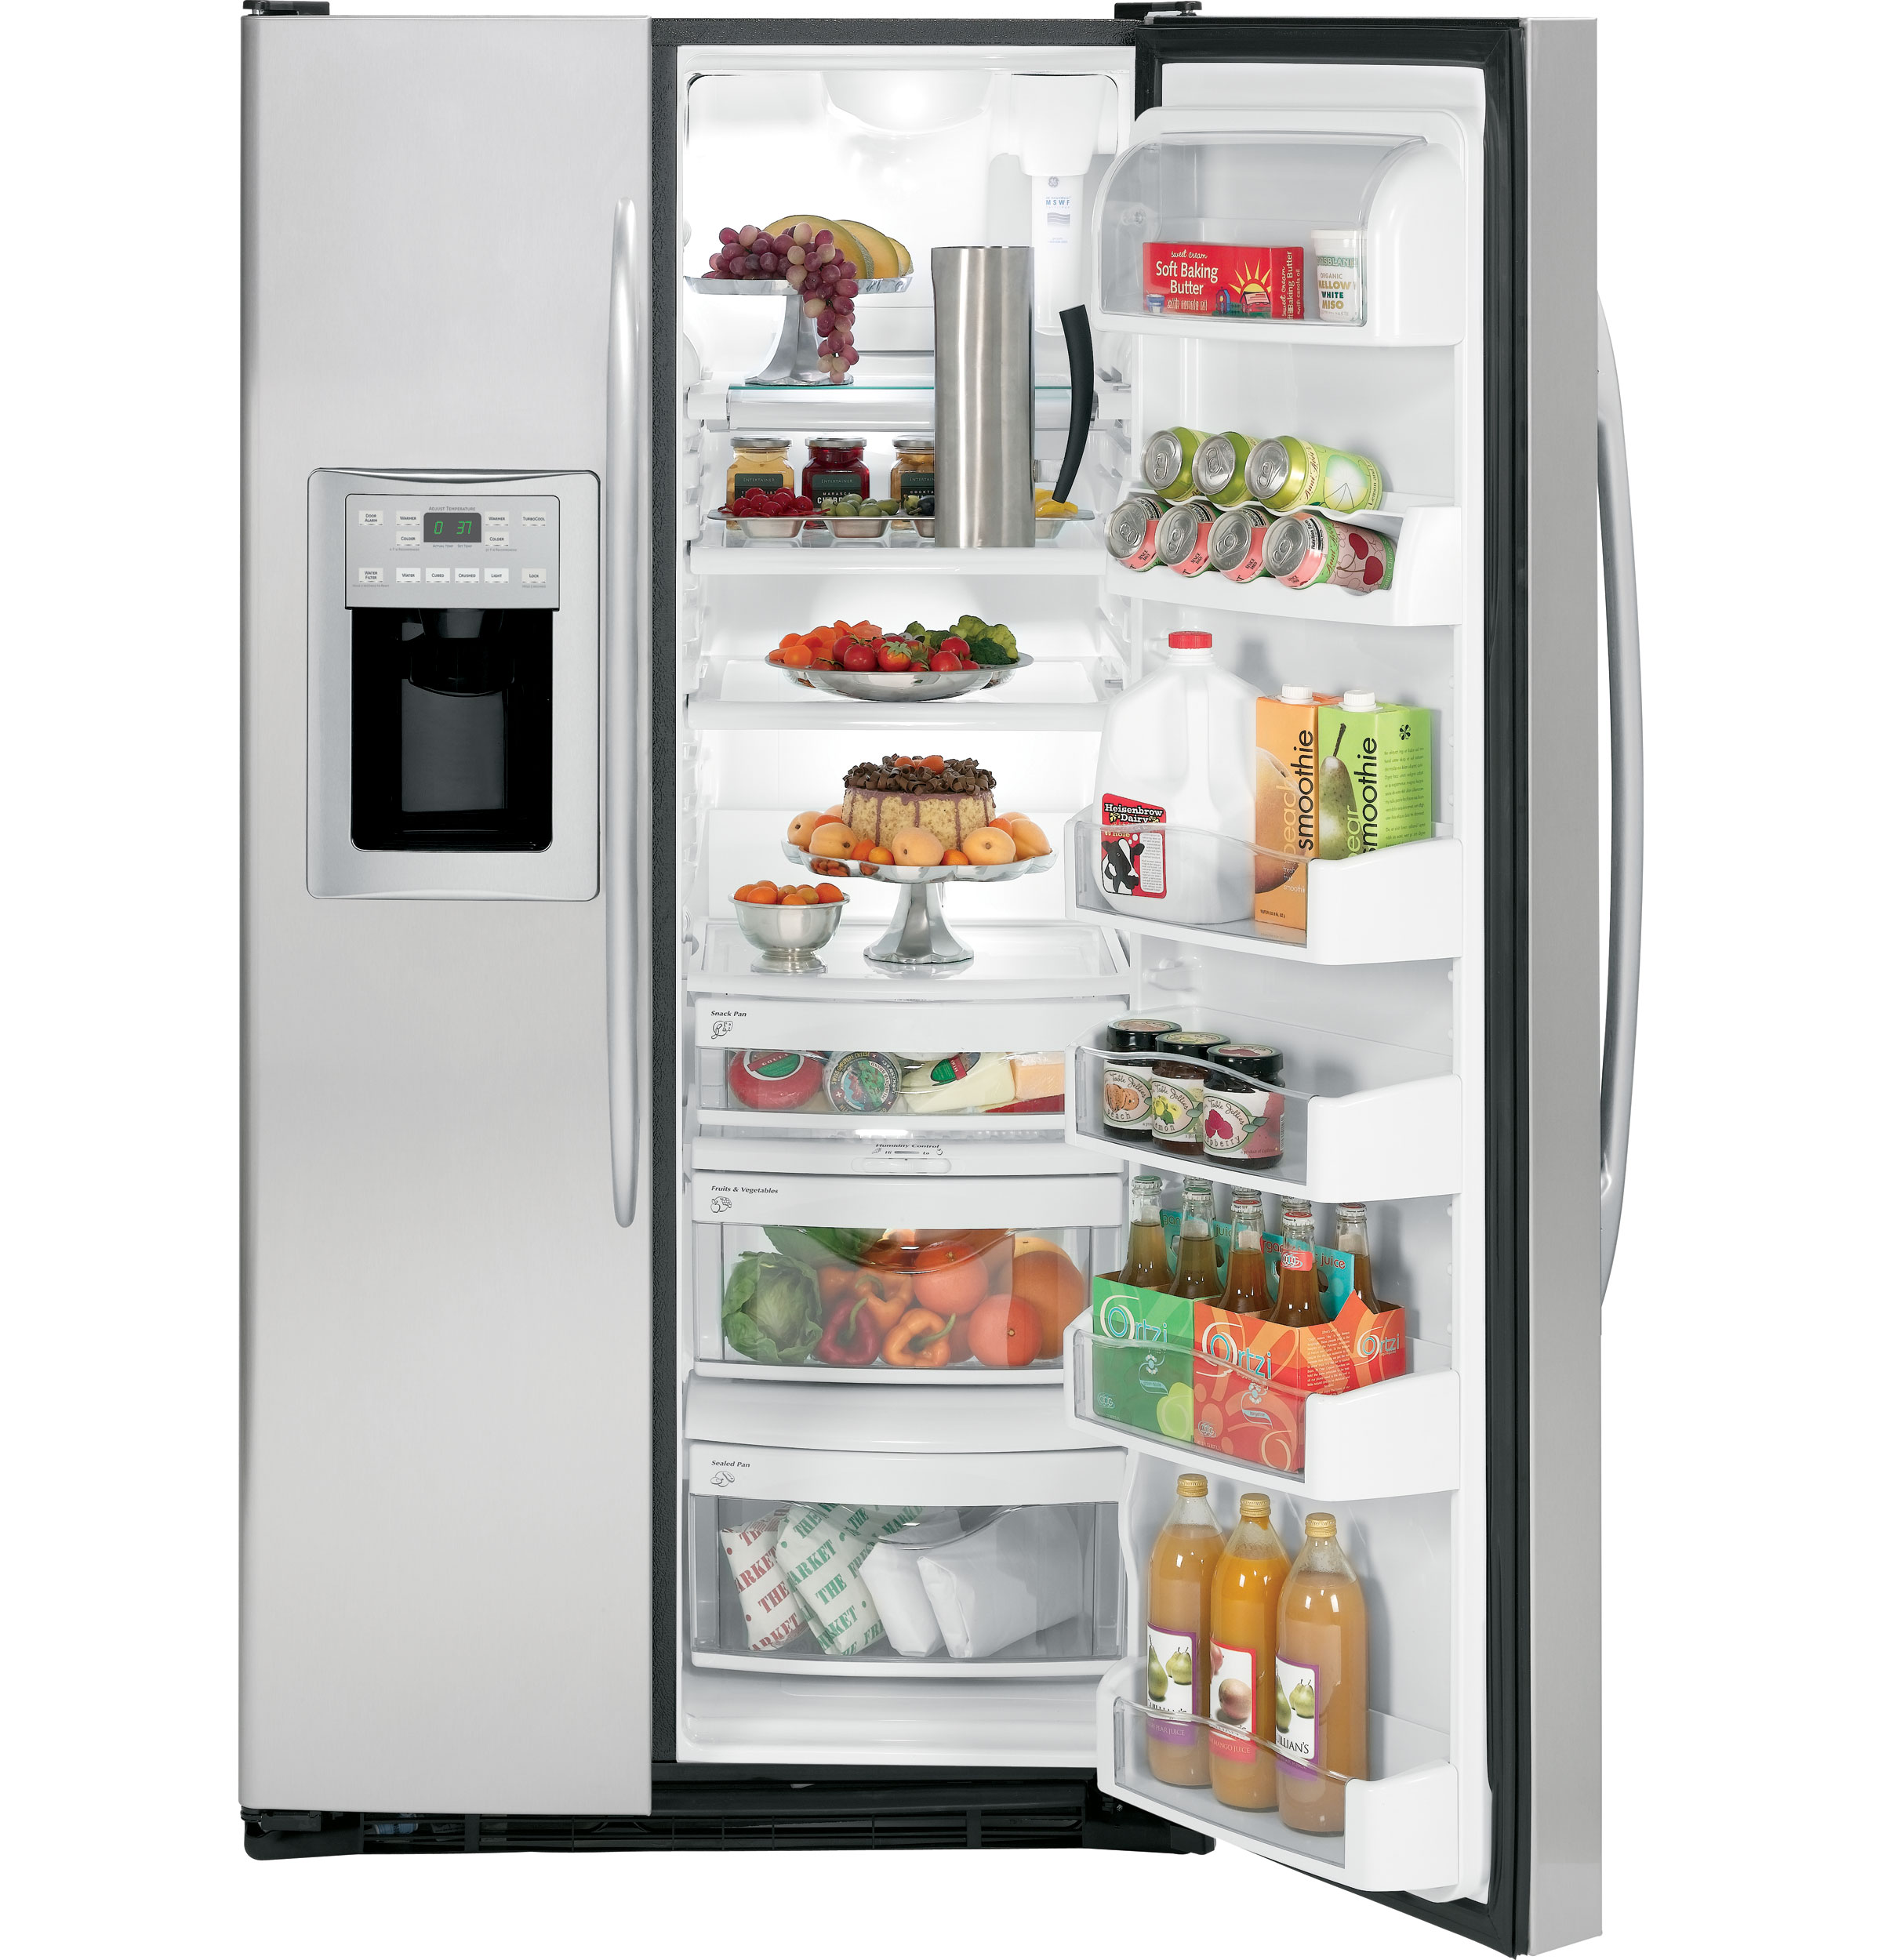 GE Profile™ ENERGY STAR® 26.0 Cu. Ft. Side-by-Side Refrigerator with Dispenser